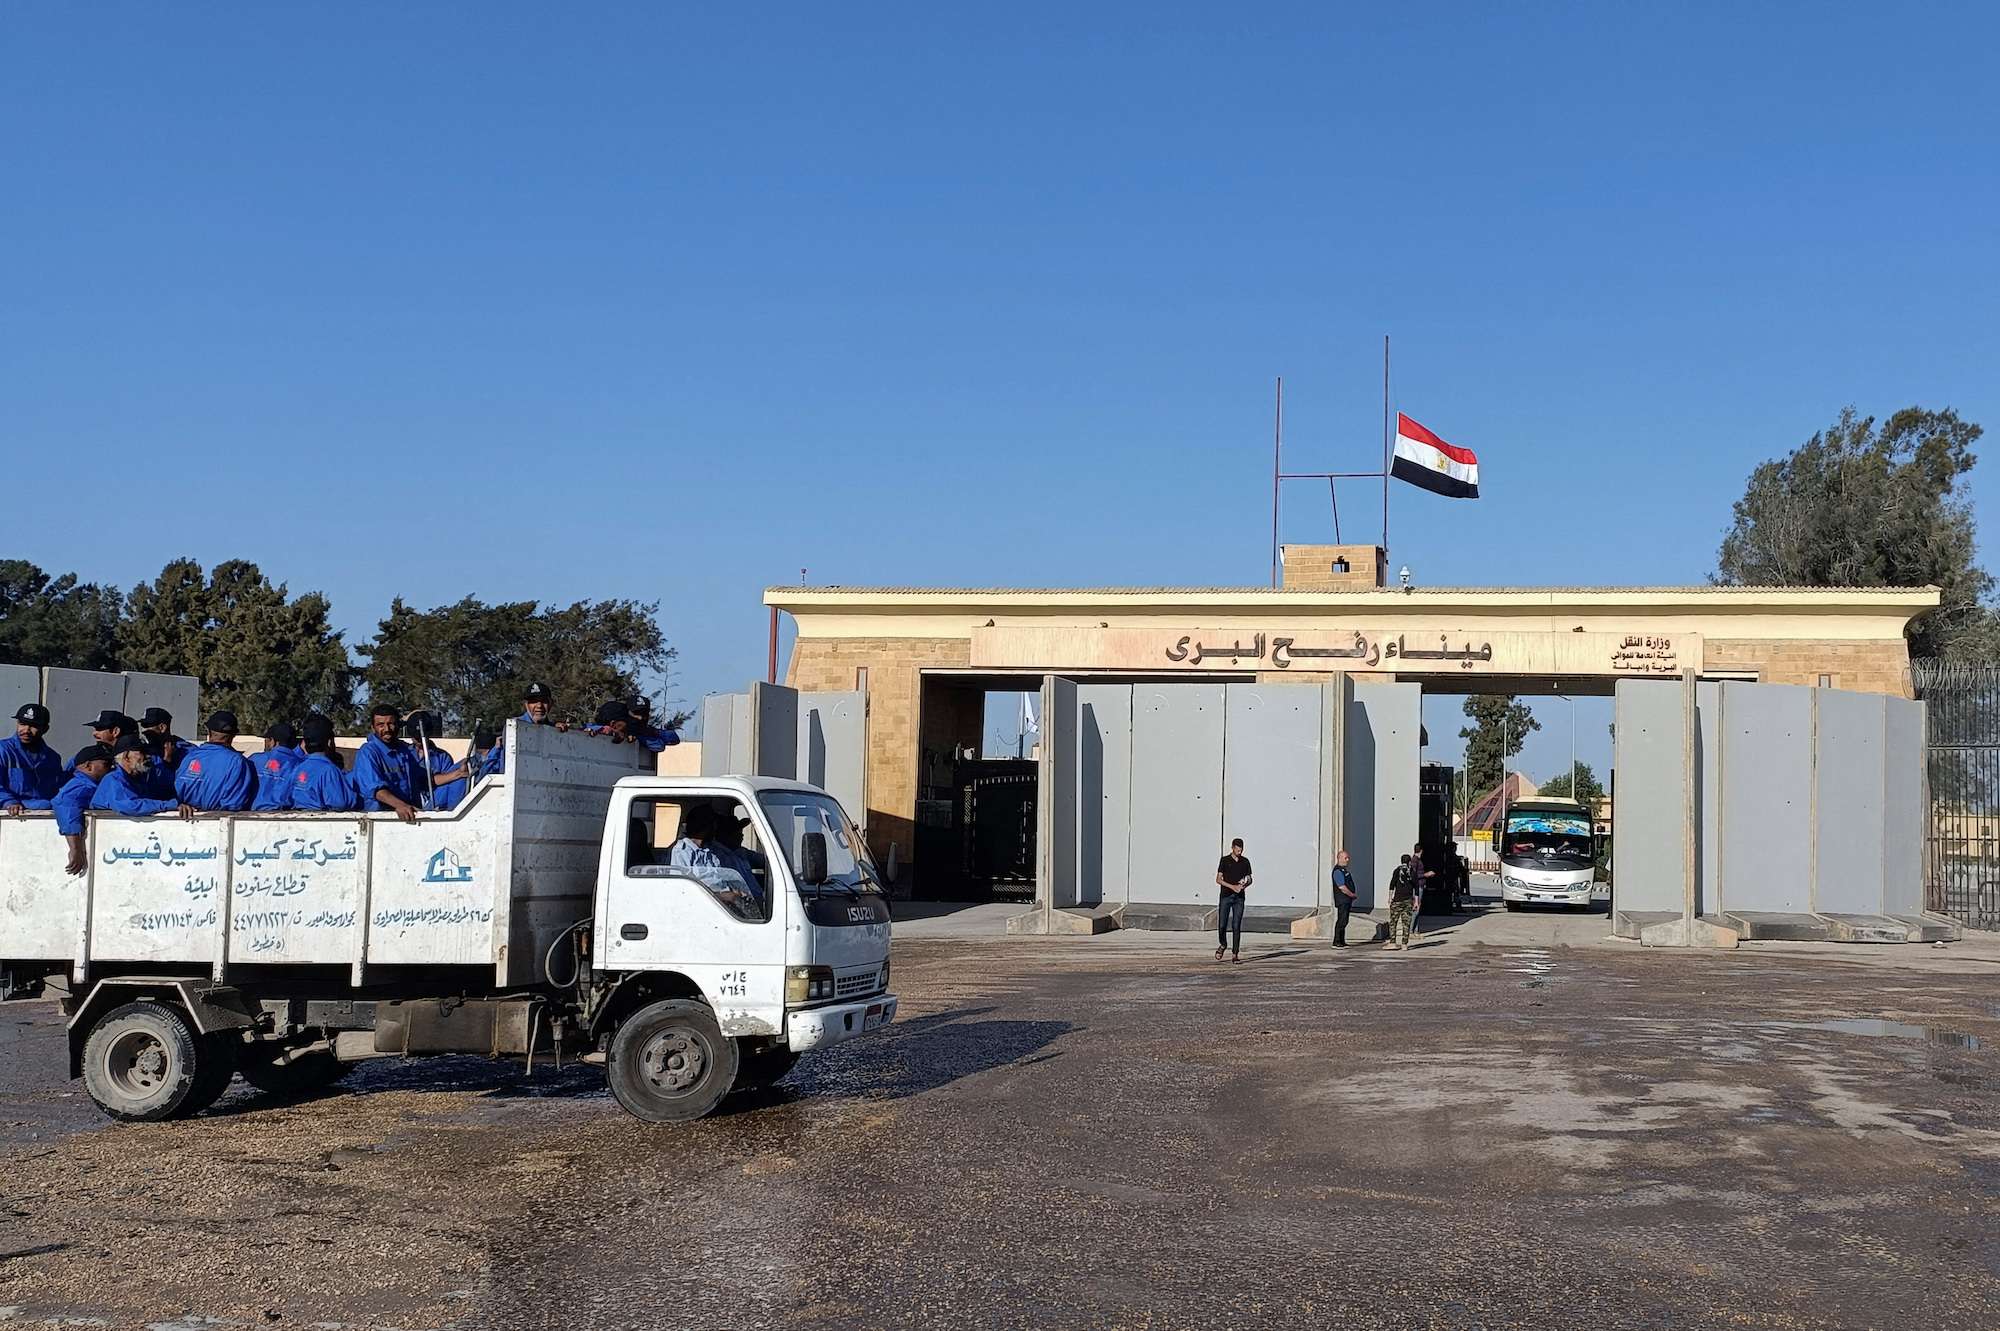 Rafah Crossing will open for aid delivery Friday morning, Egypt's state-affiliated media reports